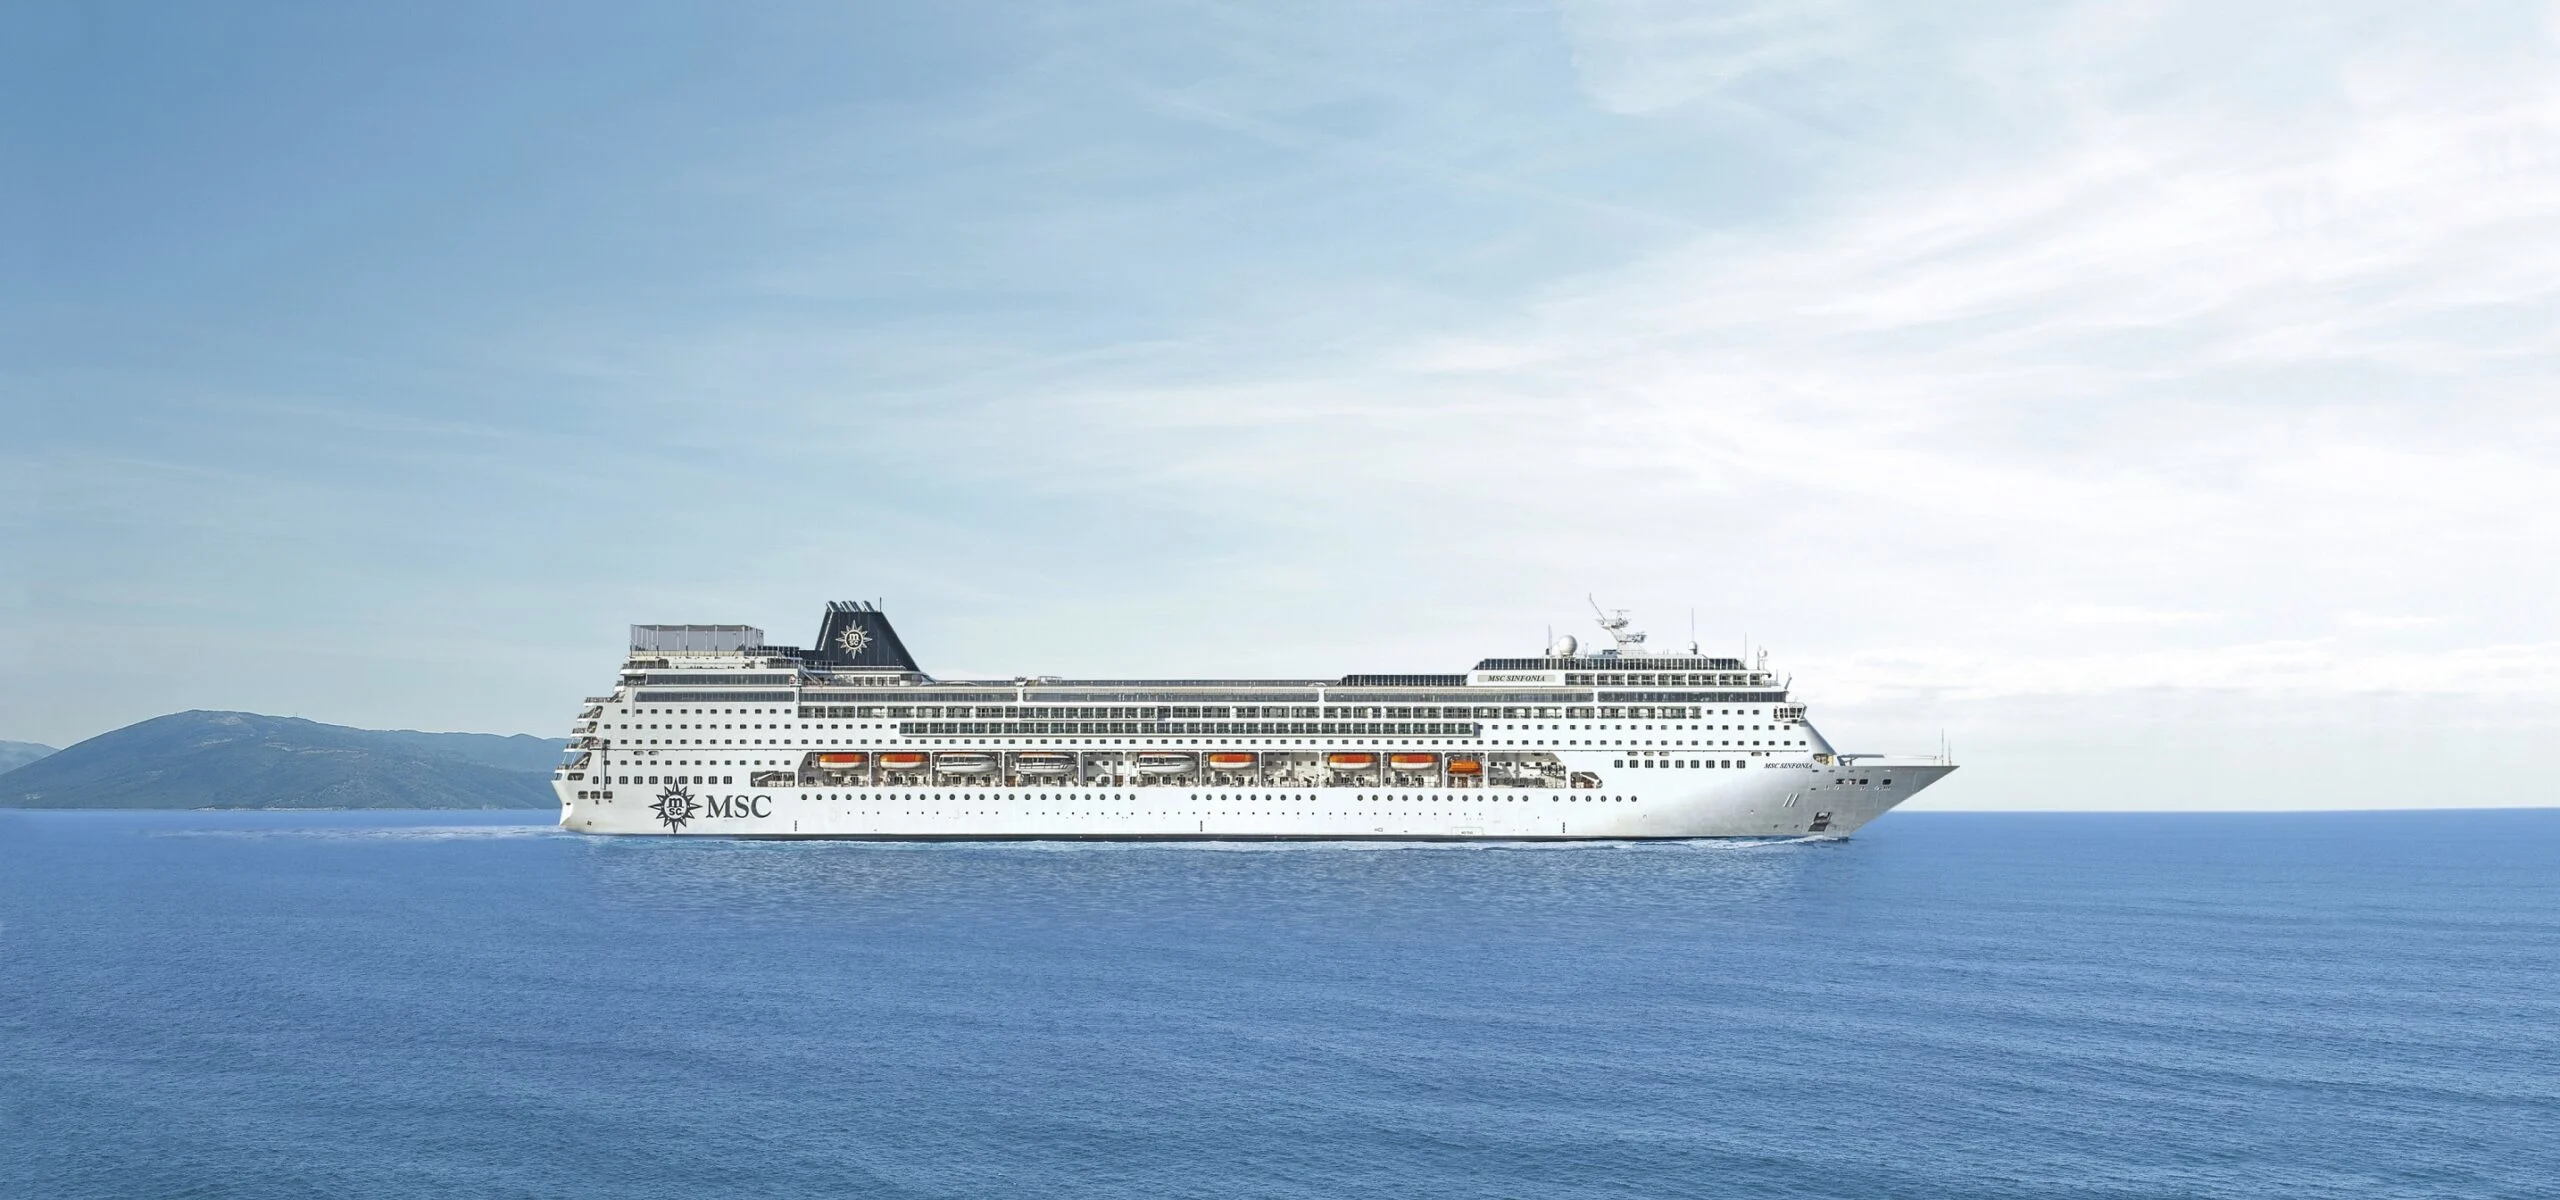 Msc Sinfonia By Courtesy Of Fincantieri S.p.a.; All Rights Reserved